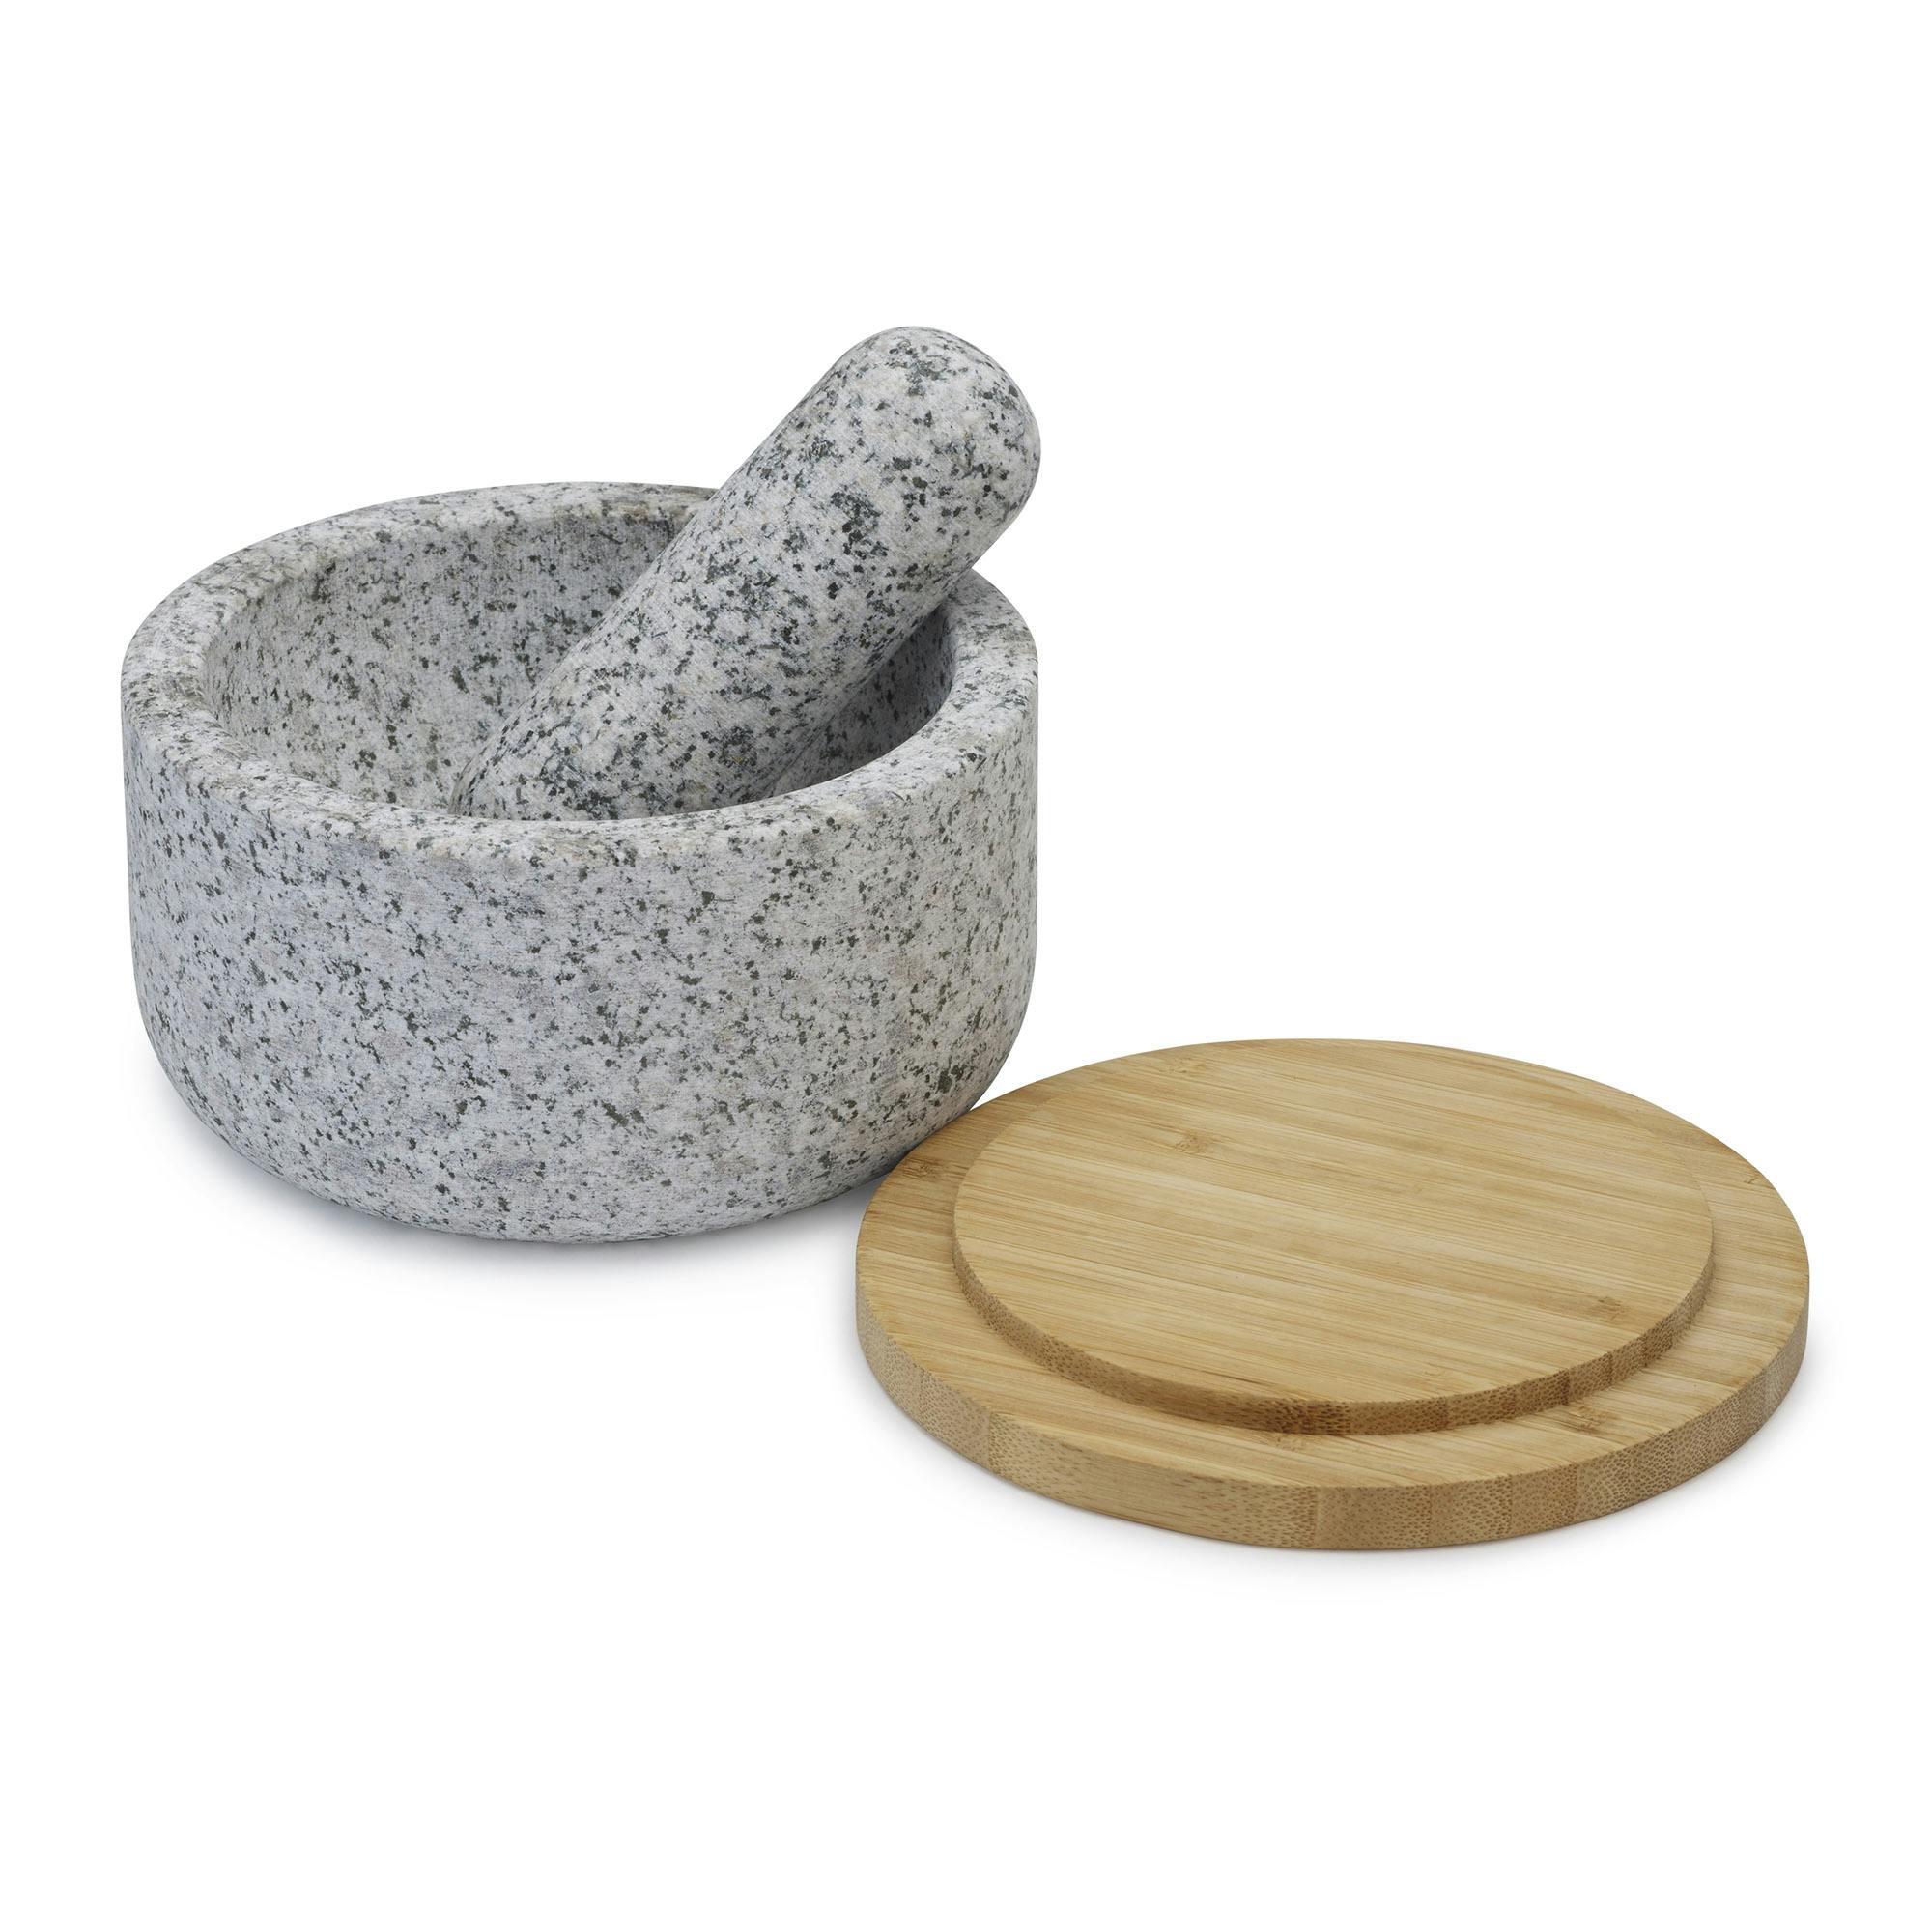 Bamboo Mortar & Pestle with Lid